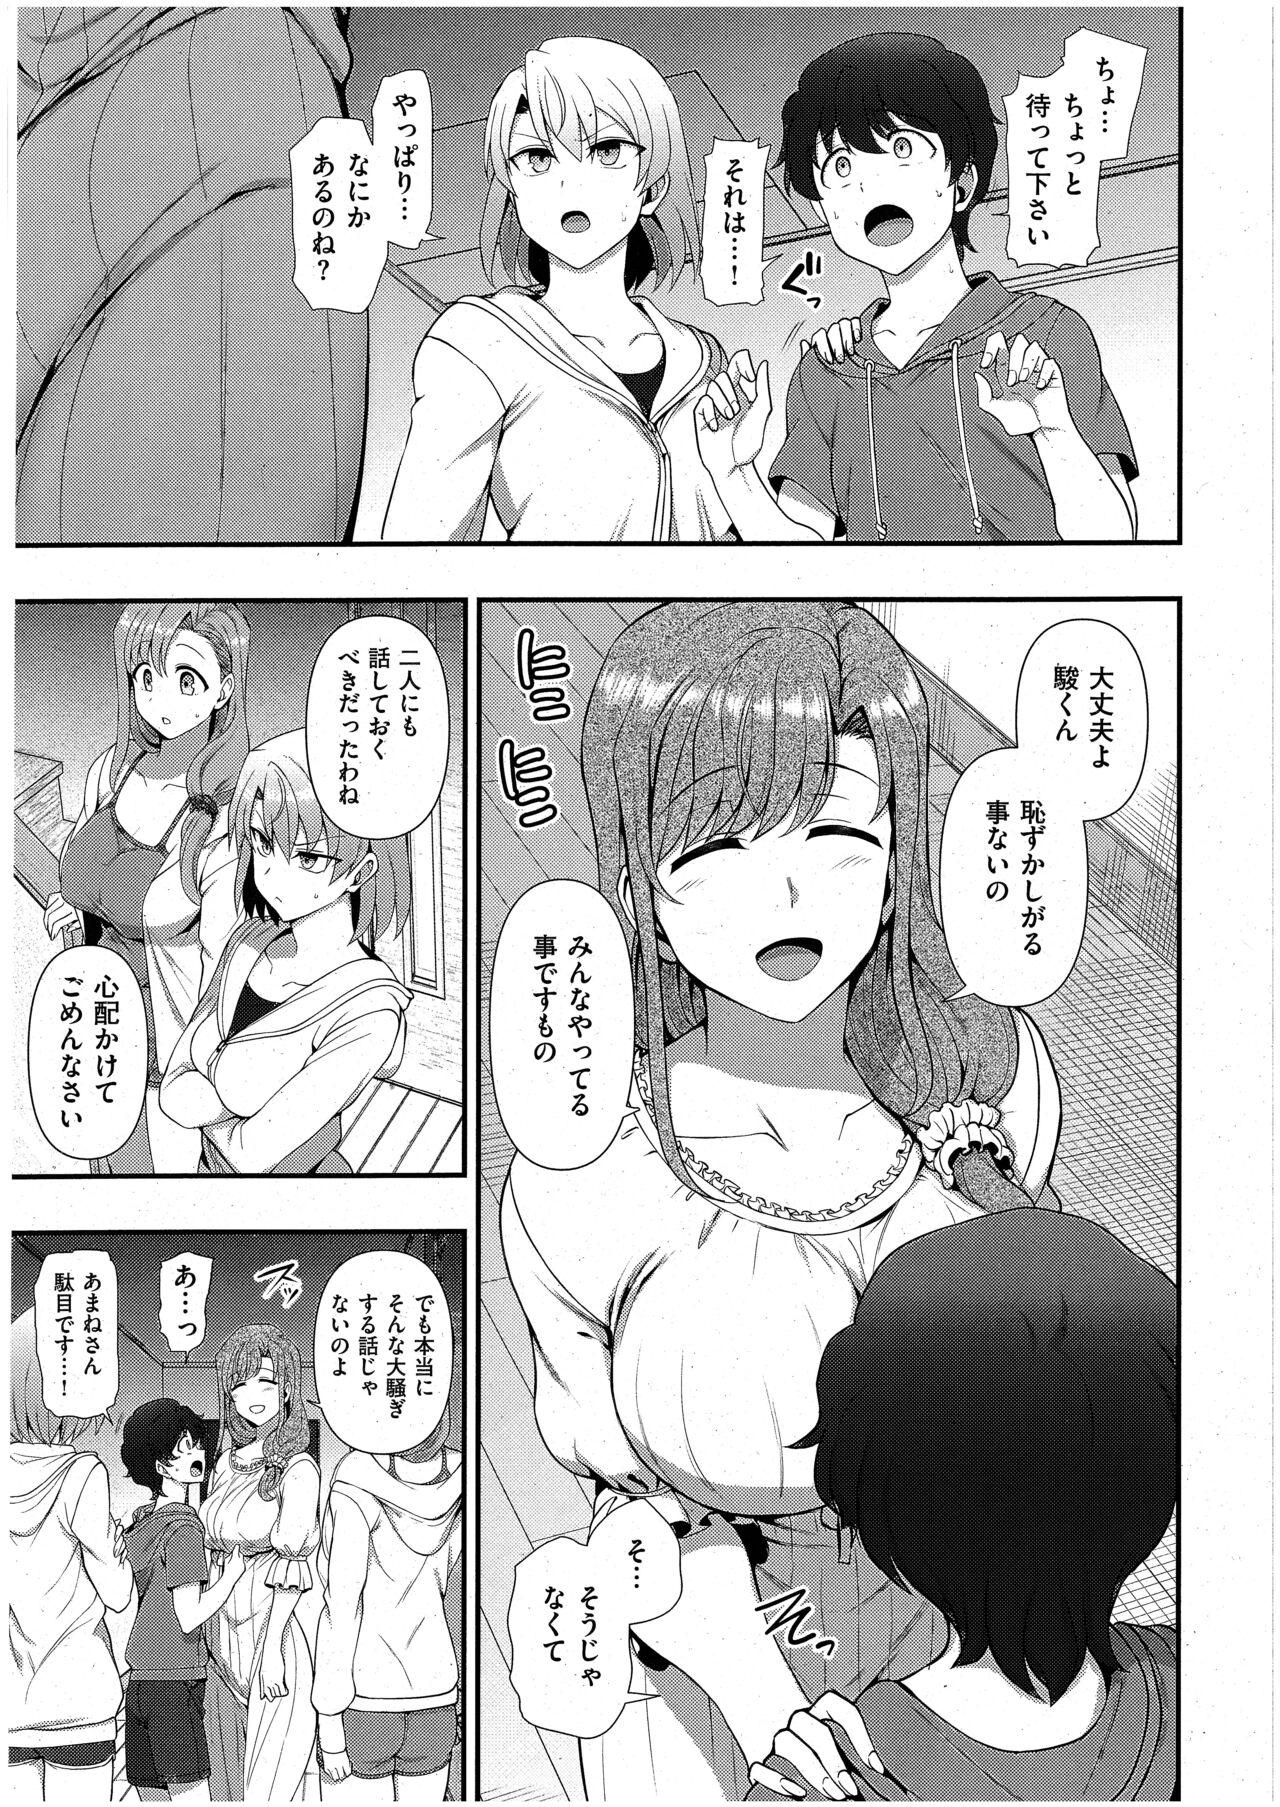 Francaise FamiCon - Family Control Ch. 3 18 Year Old - Page 5